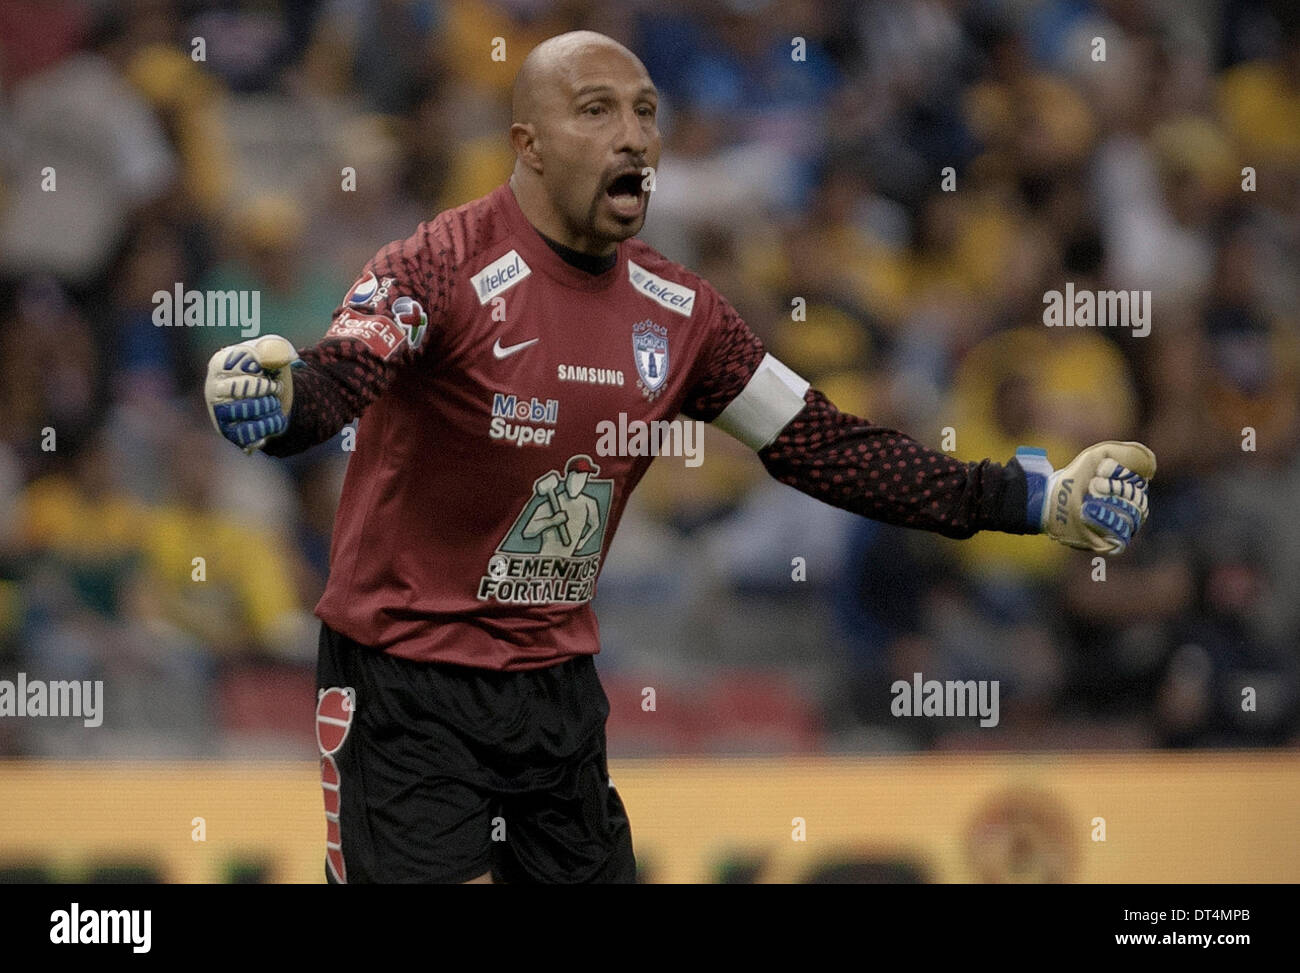 Mexico City, Mexico. 8th Feb, 2014. Goalkeeper Oscar Perez of Pachuca reacts during a Liga MX match against America at Azteca Stadium in Mexico City, capital of Mexico, on Feb. 8, 2014. Credit:  Alejandro Ayala/Xinhua/Alamy Live News Stock Photo